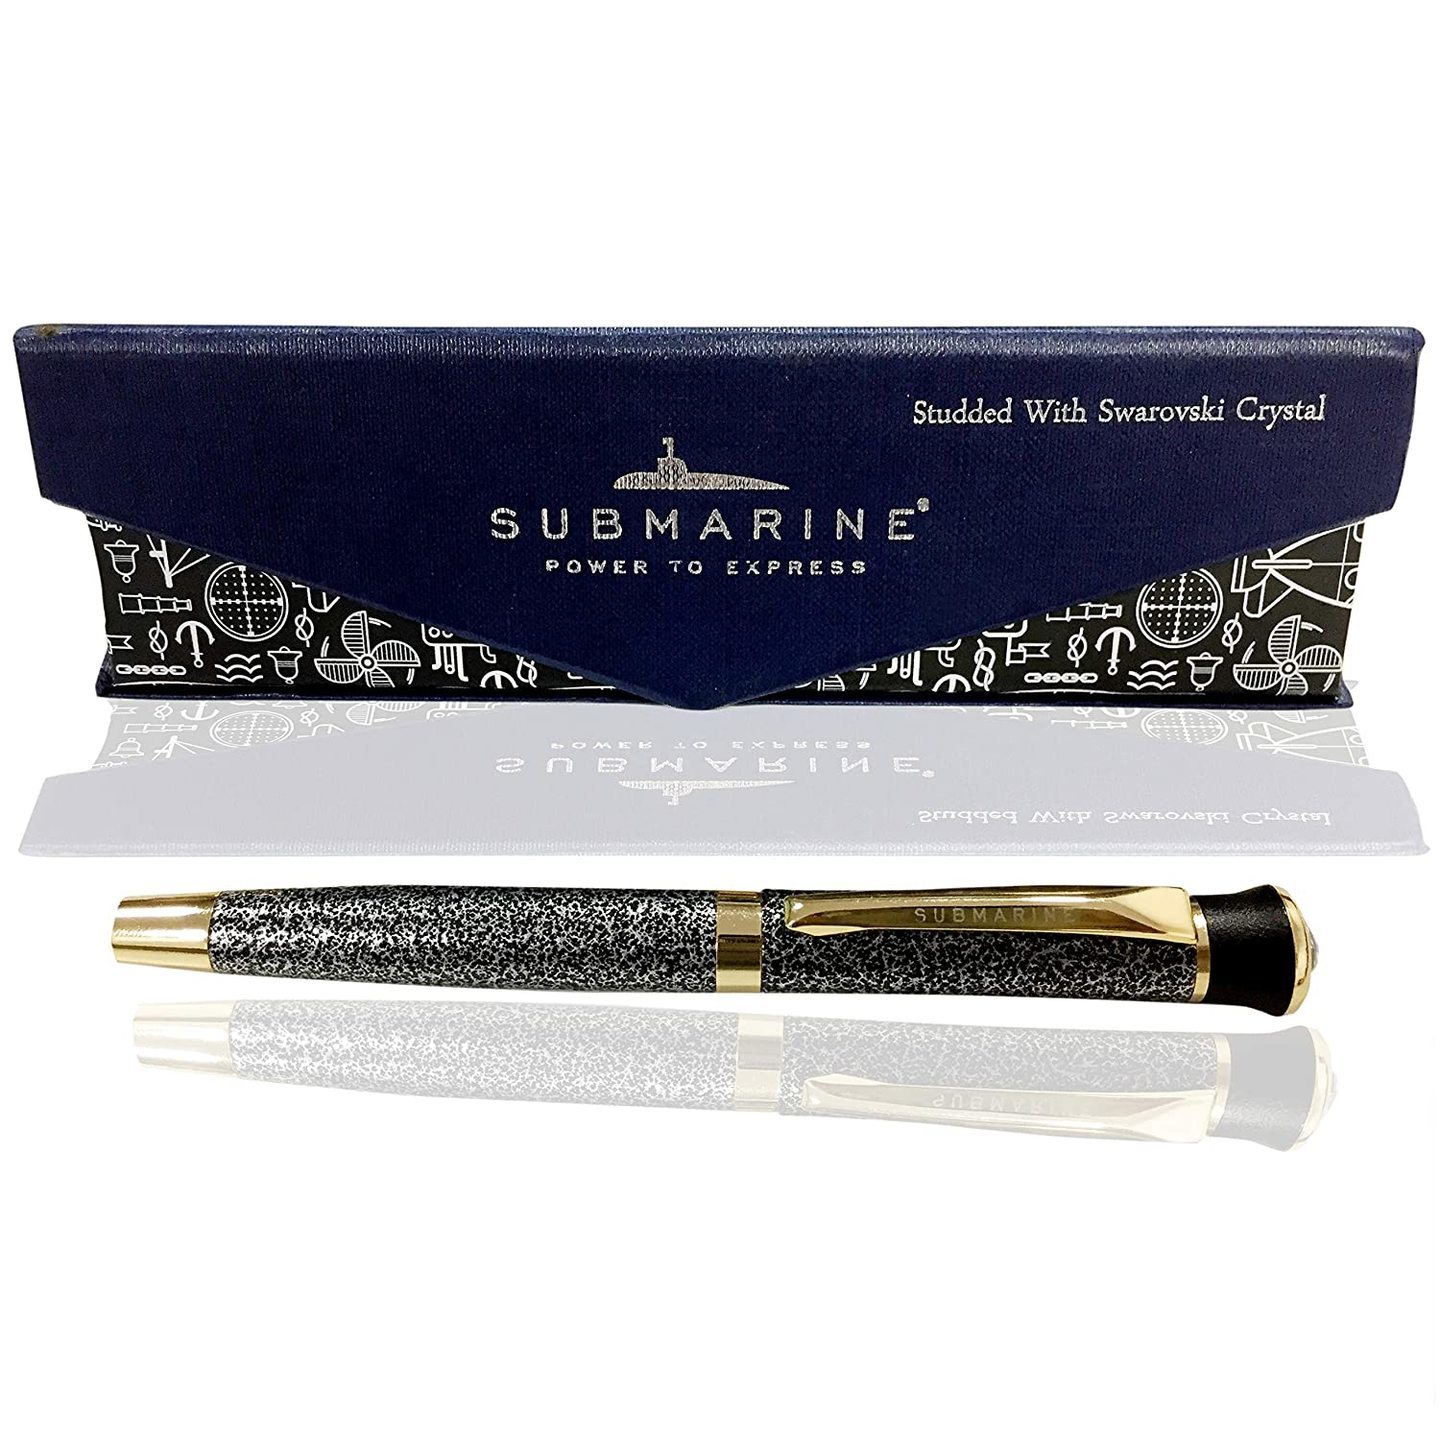 Submarine Roller Ballpoint Pen - Gold Plated with Antique Silver Powder Coating, Medium Point Blue Ink